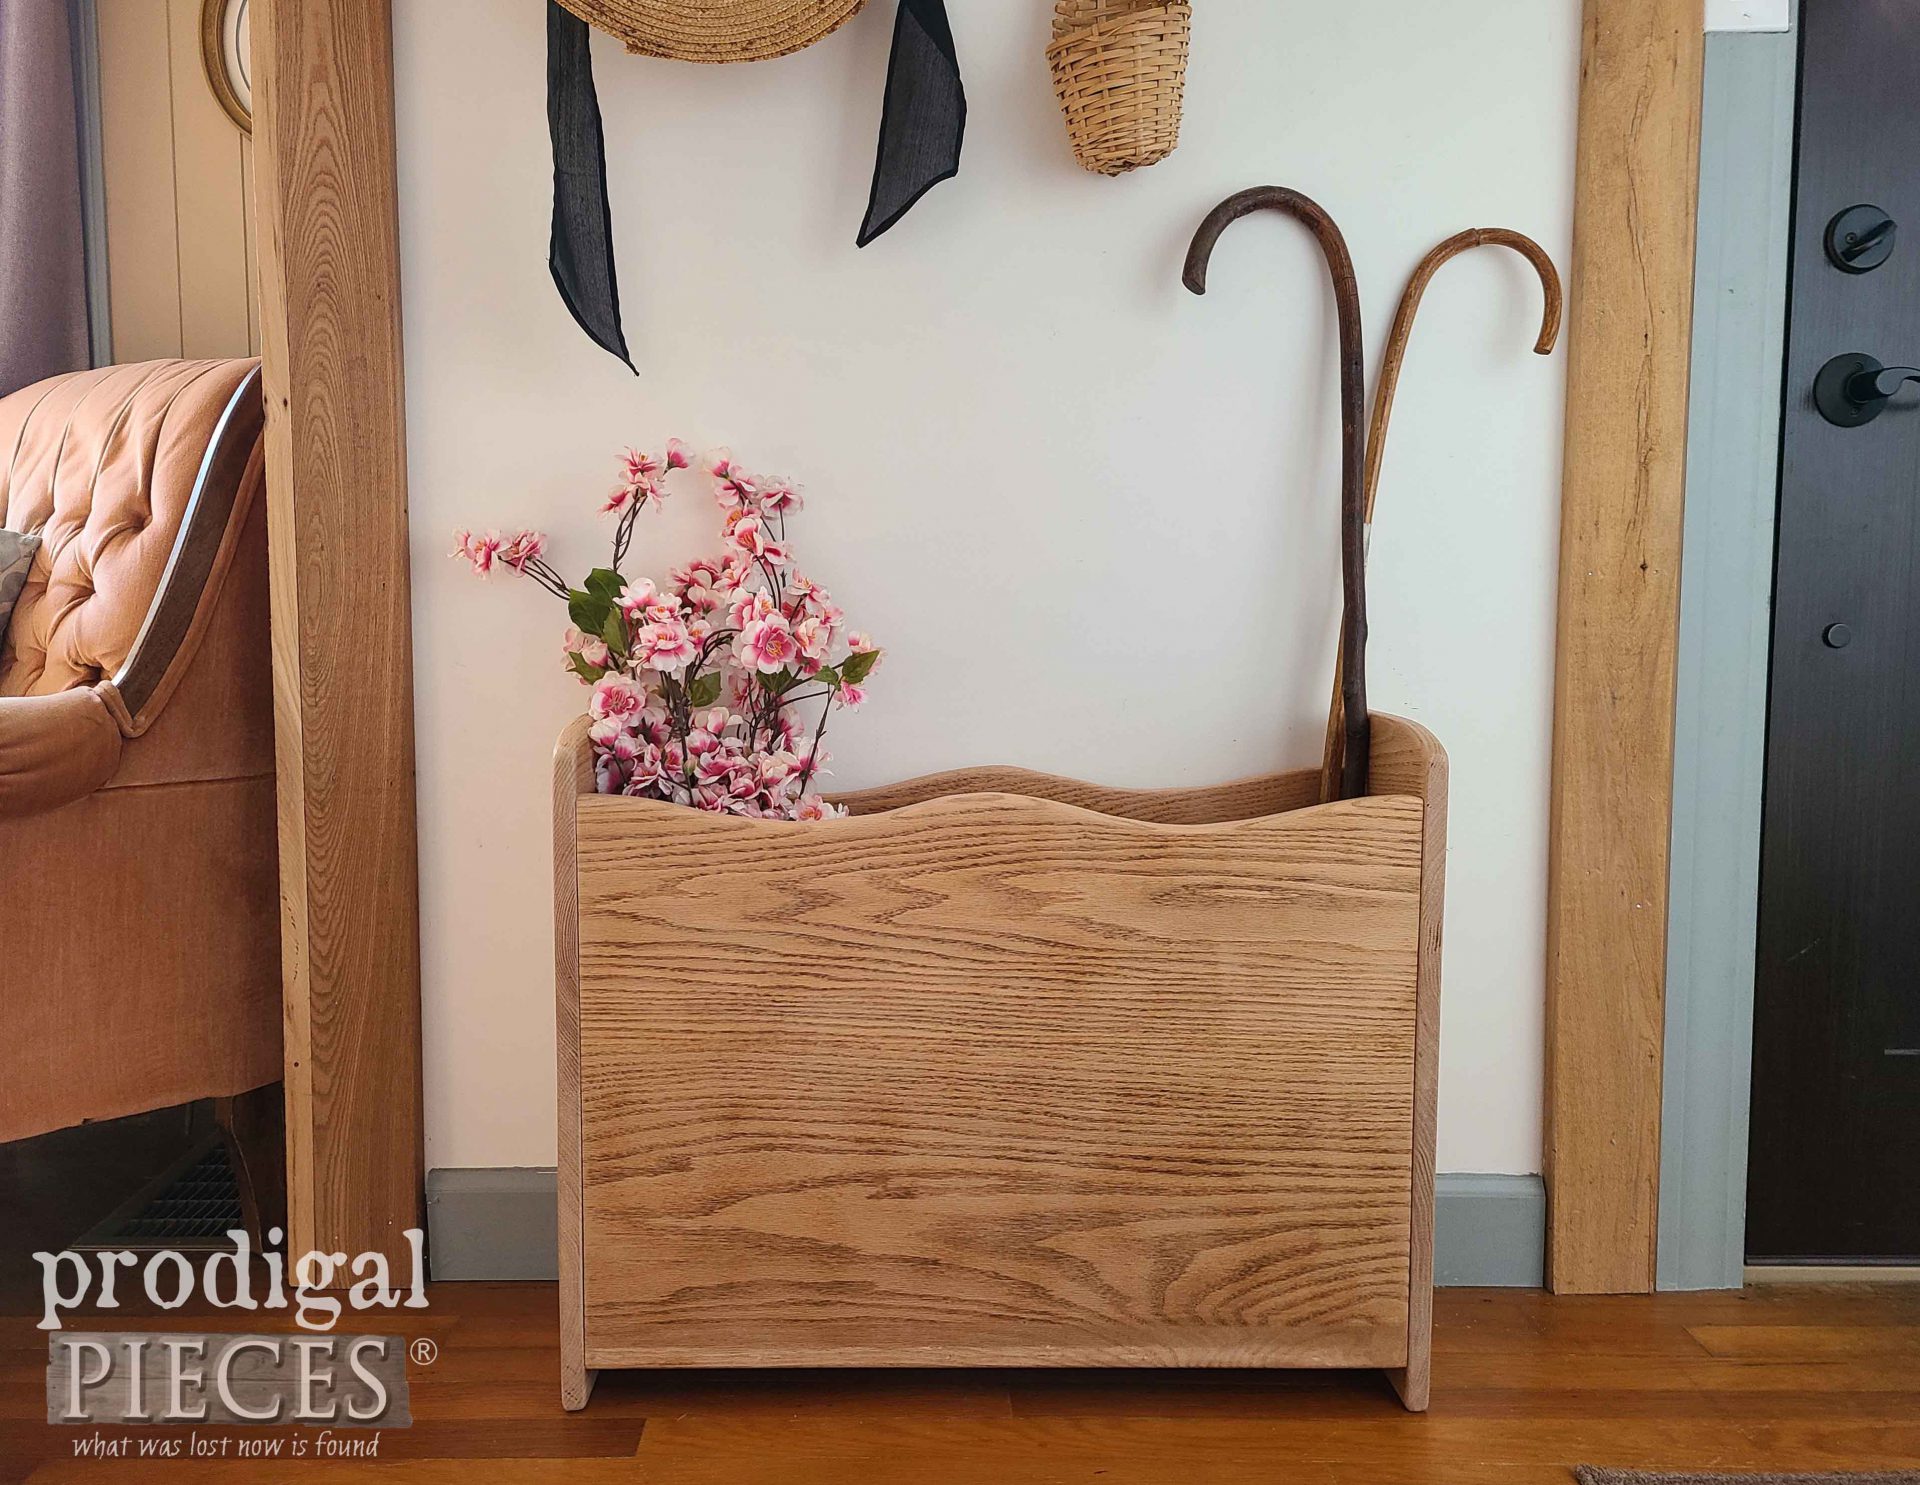 Handmade Oak Storage Bin from Broken Baby Cradle Upcycled by Larissa of Prodigal Pieces | prodigalpieces.com #prodigalpieces #handmade #home #furniture